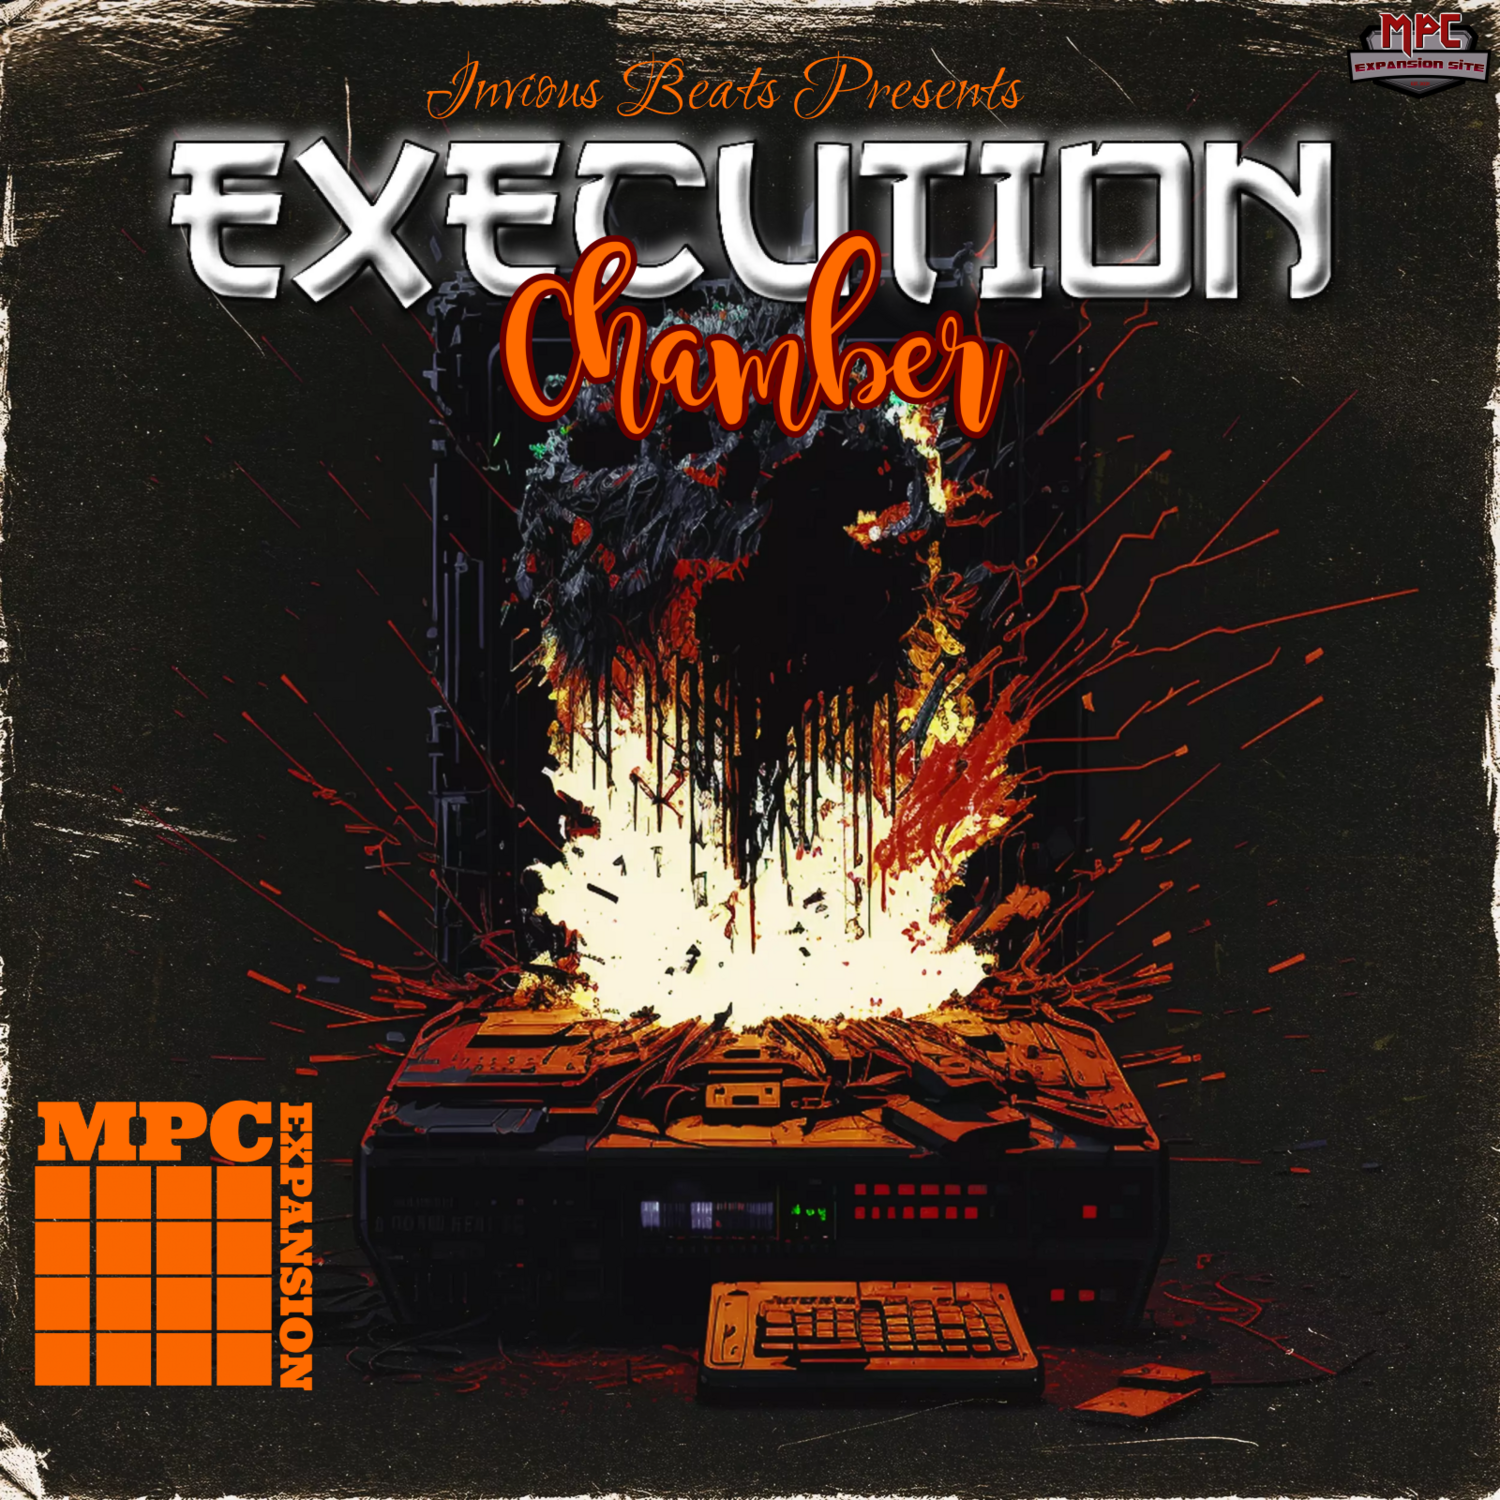 MPC EXPANSION 'EXECUTION CHAMBER' by INVIOUS